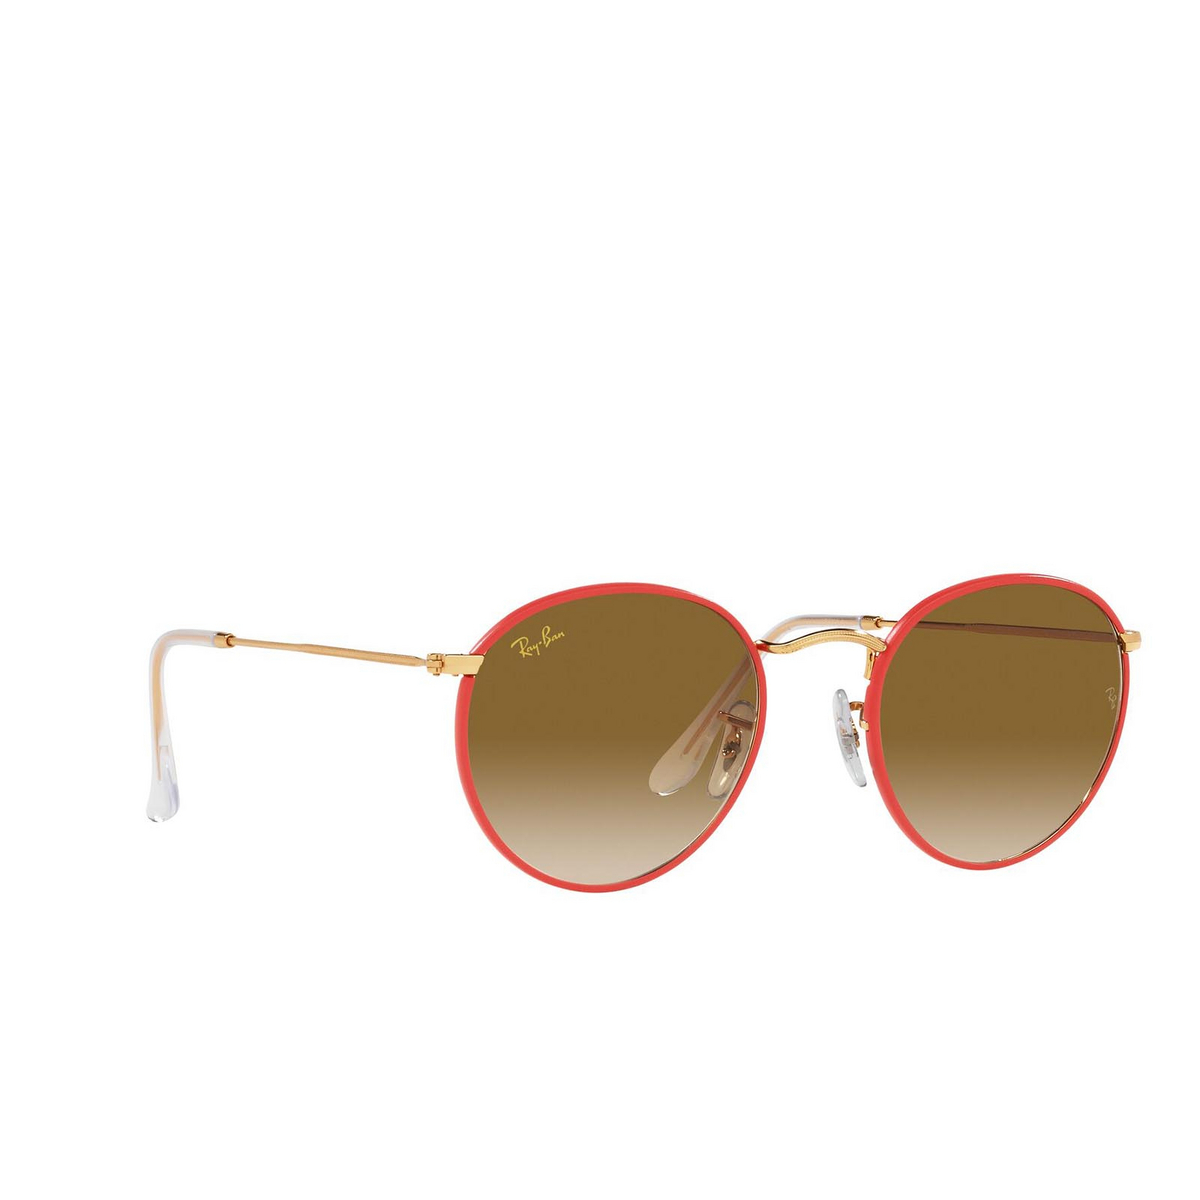 Ray-Ban ROUND FULL COLOR Sunglasses 919651 Red on Legend Gold - three-quarters view